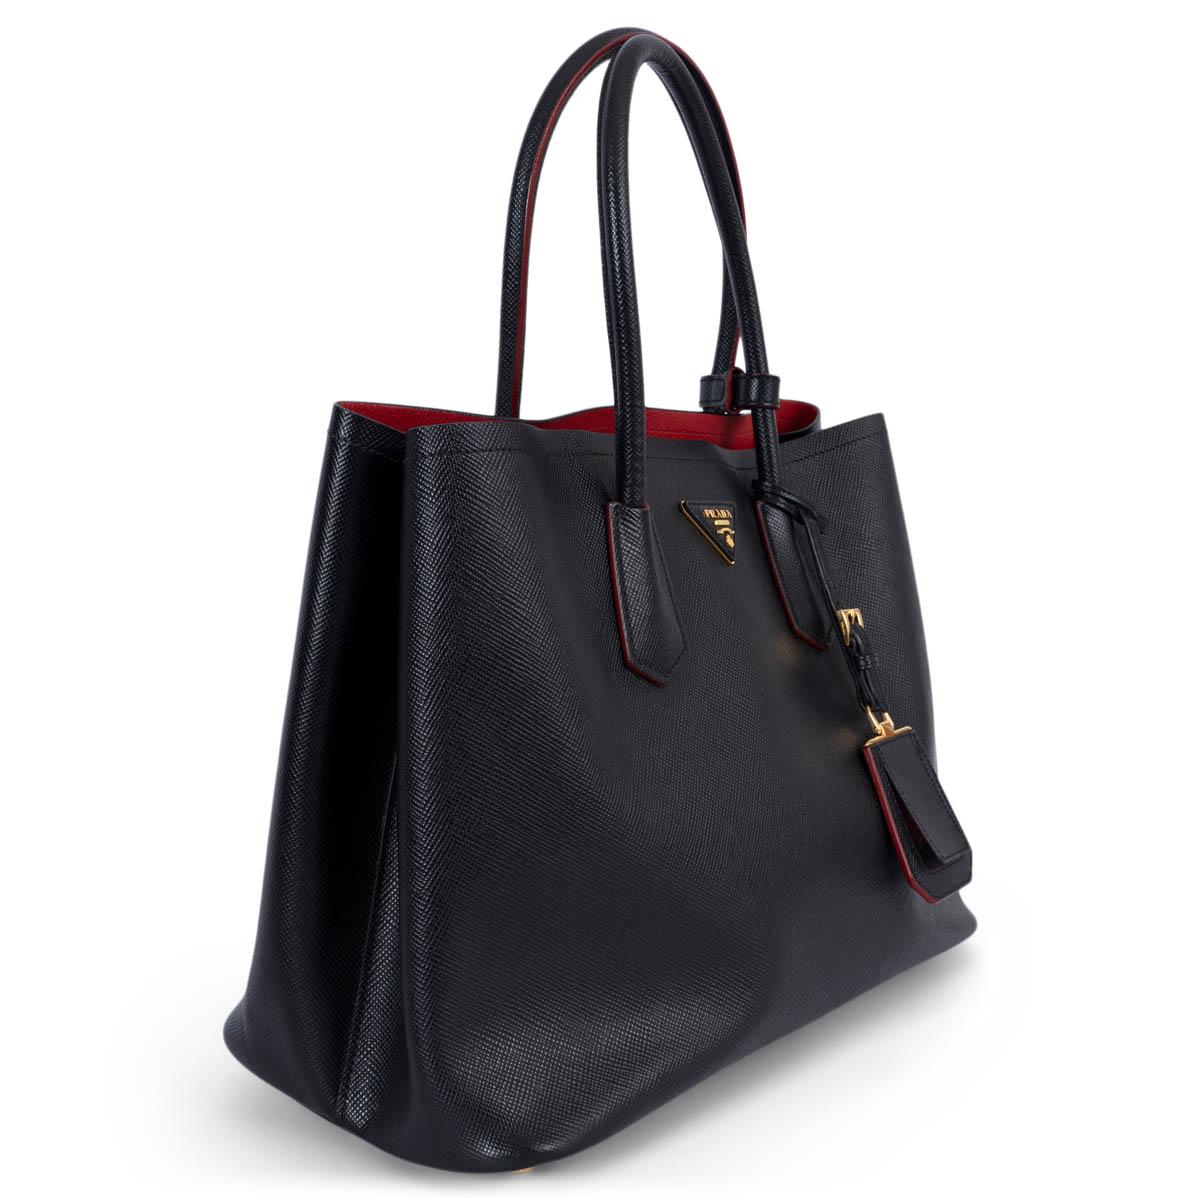 100% authentic Prada Large Double bag in Nero black Saffiano leather. Features double handles and a detachable shoulder strap, gold-tone hardware, a leather name tag with metal details, metal lettering logo on a leather triangle at the front and